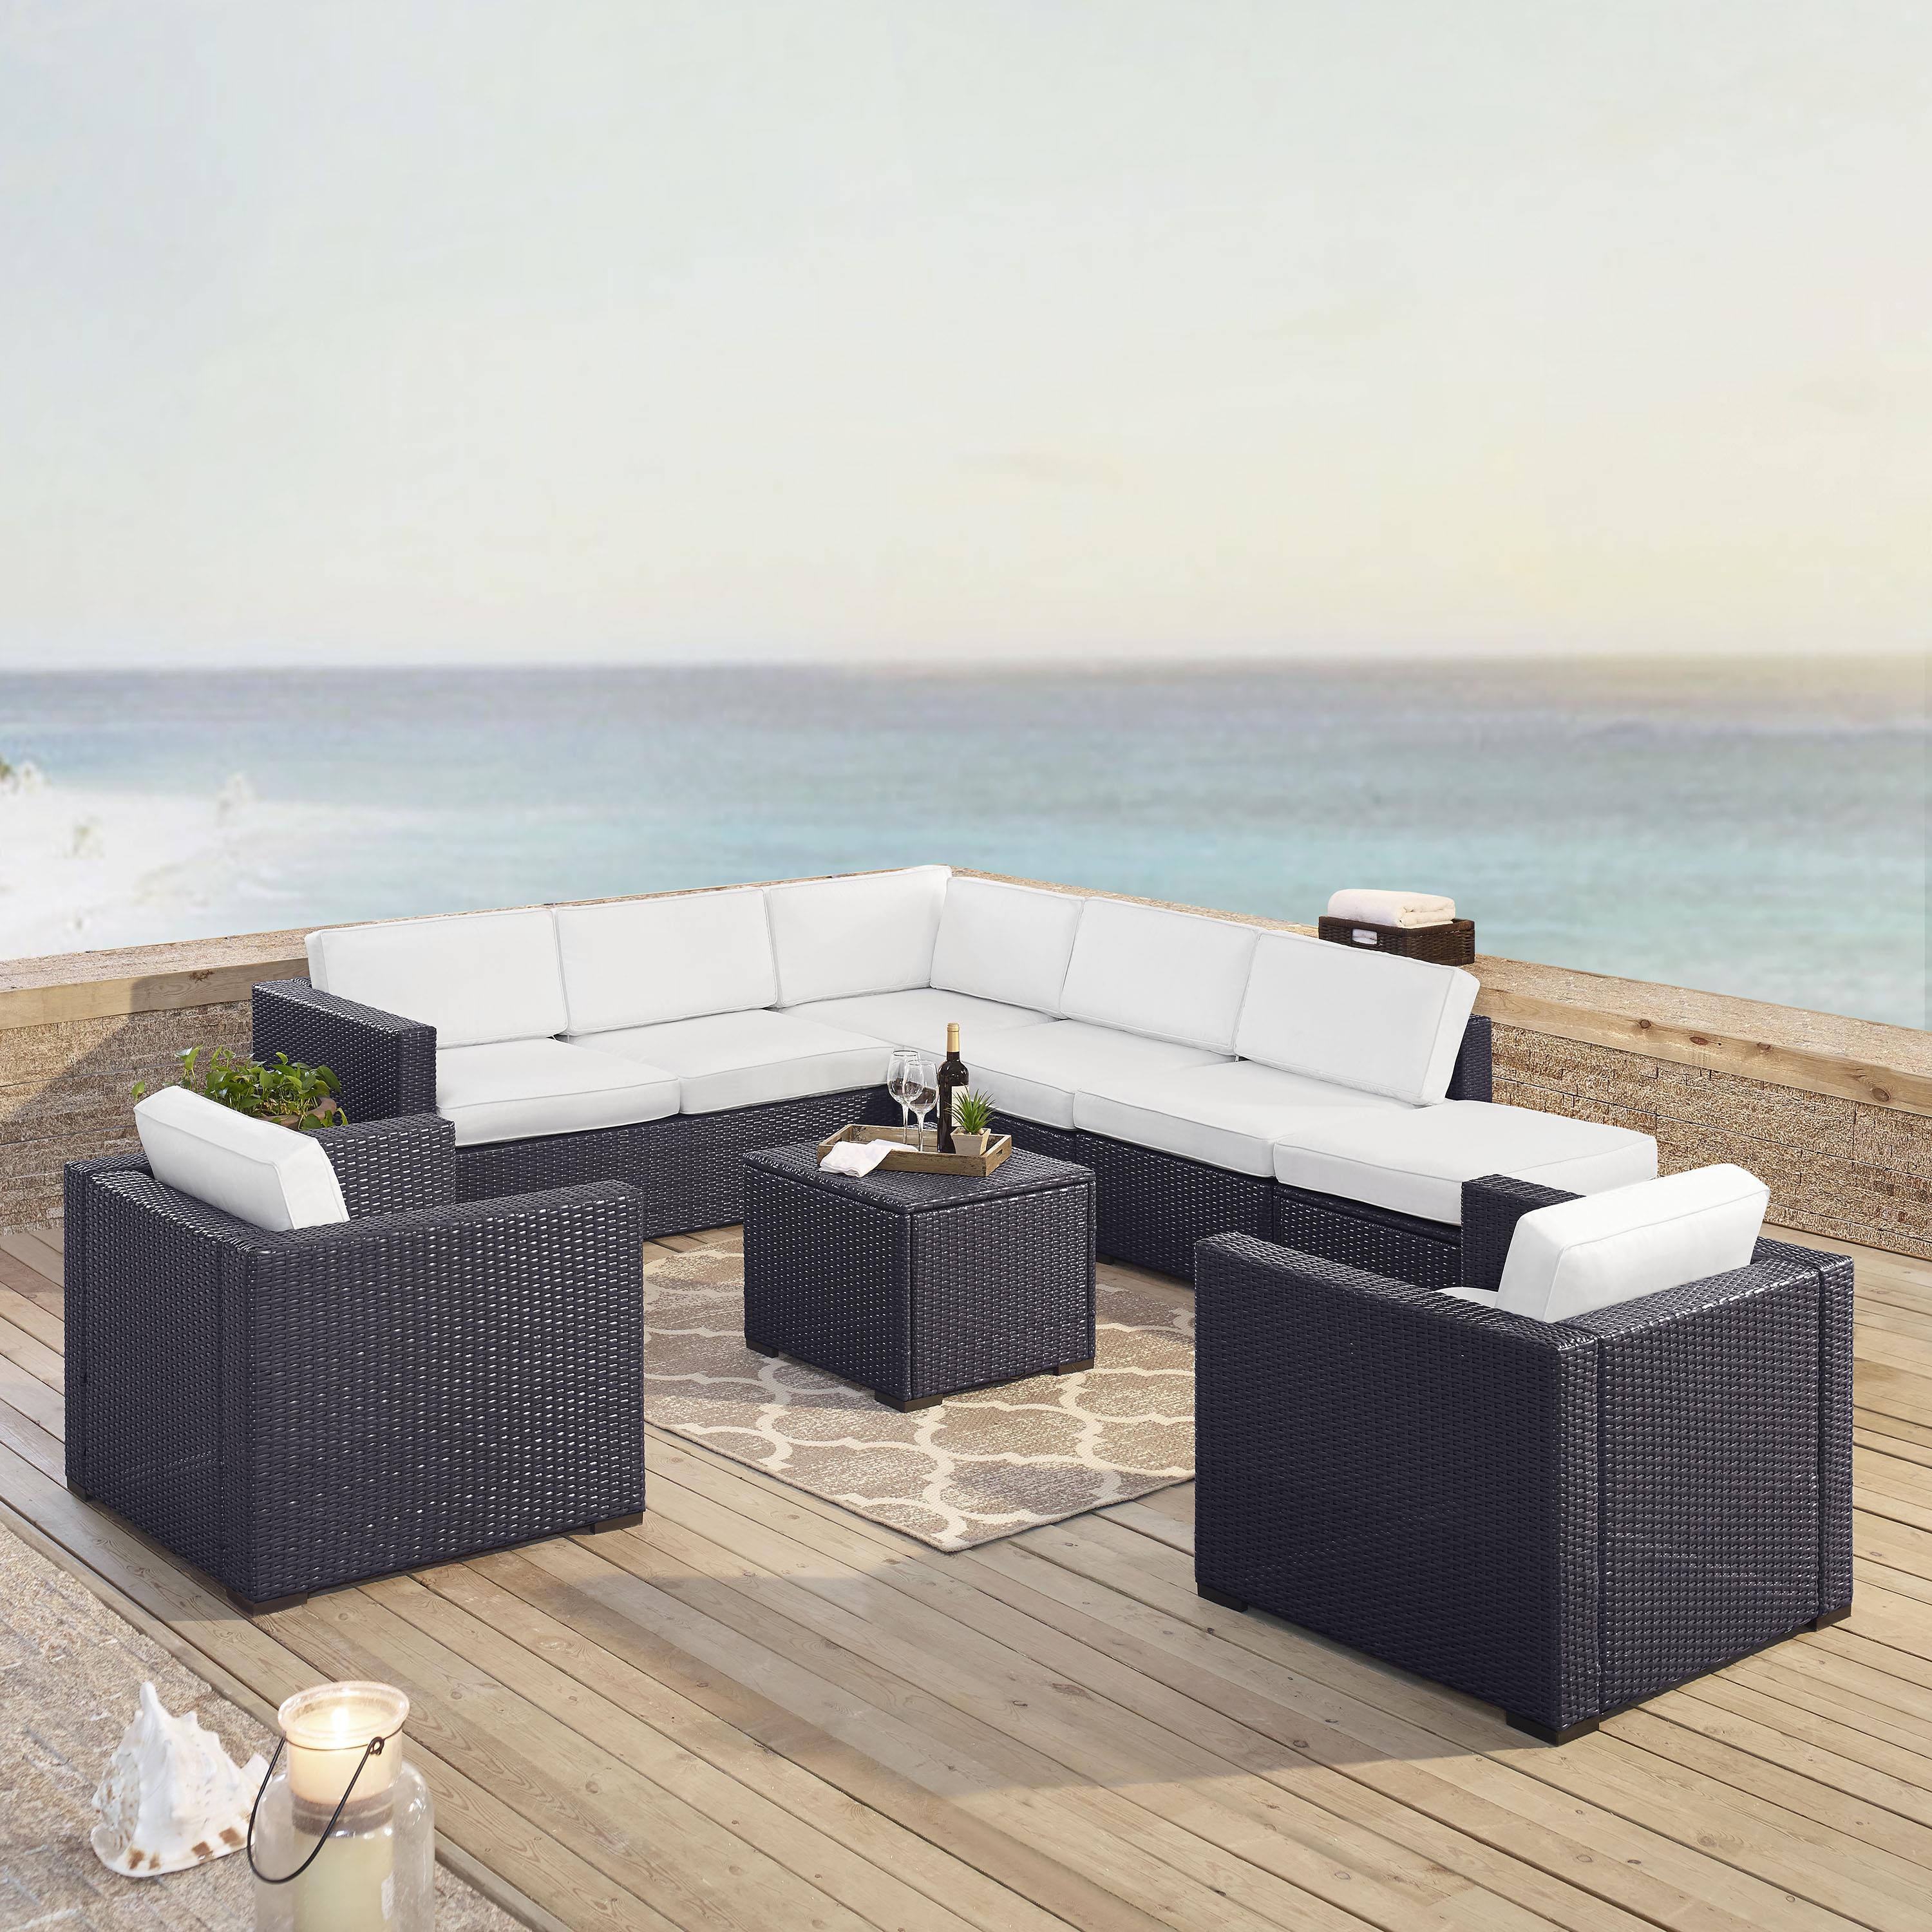 Crosley  Biscayne 7 Piece Outdoor Wicker Seating Set - White - image 4 of 4